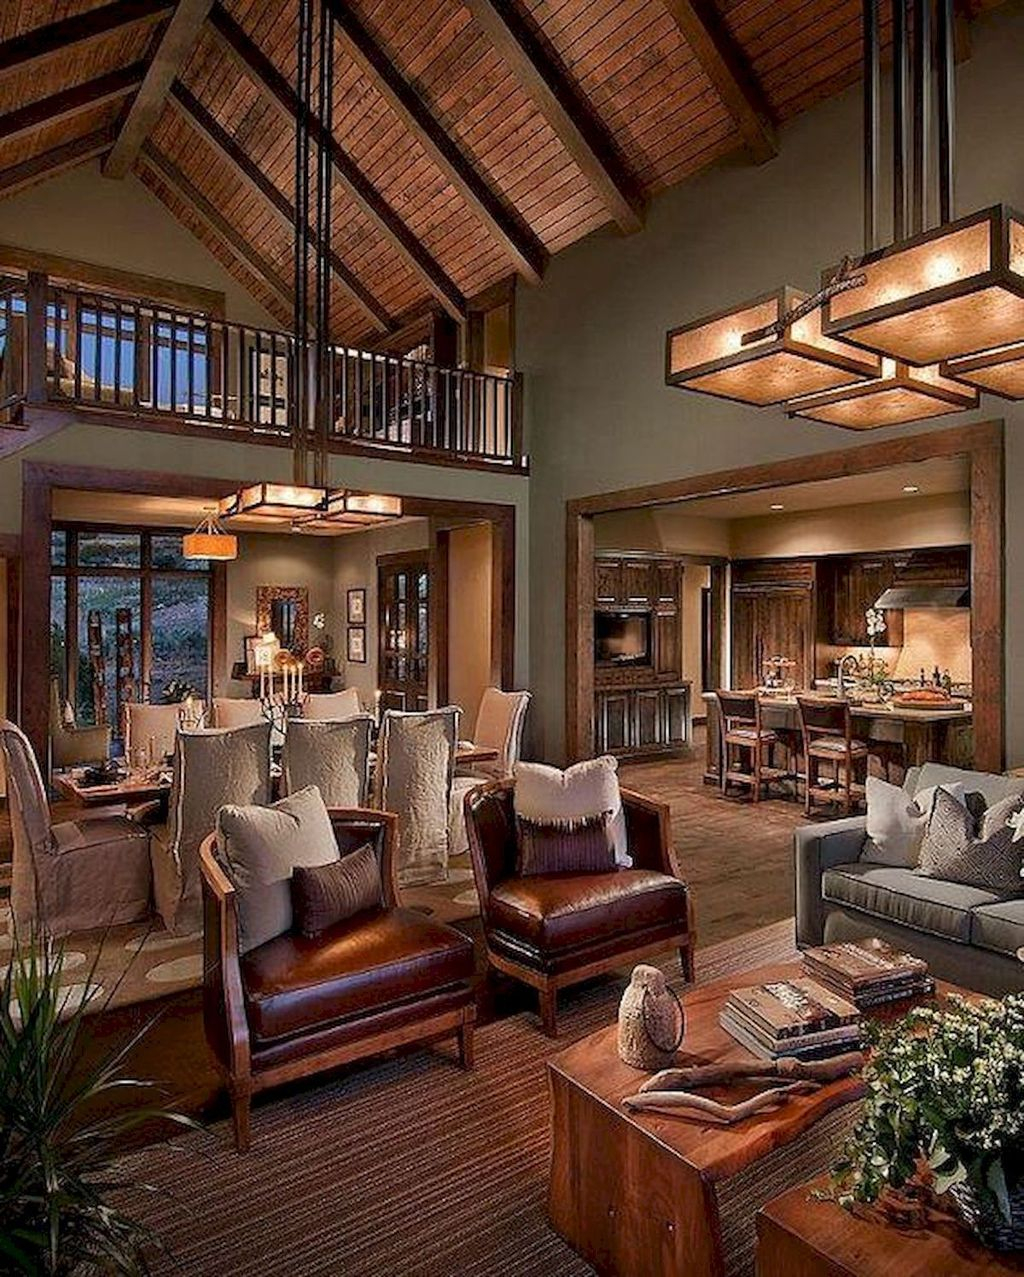 Gorgeous Log Cabin Style Home Interior Design28